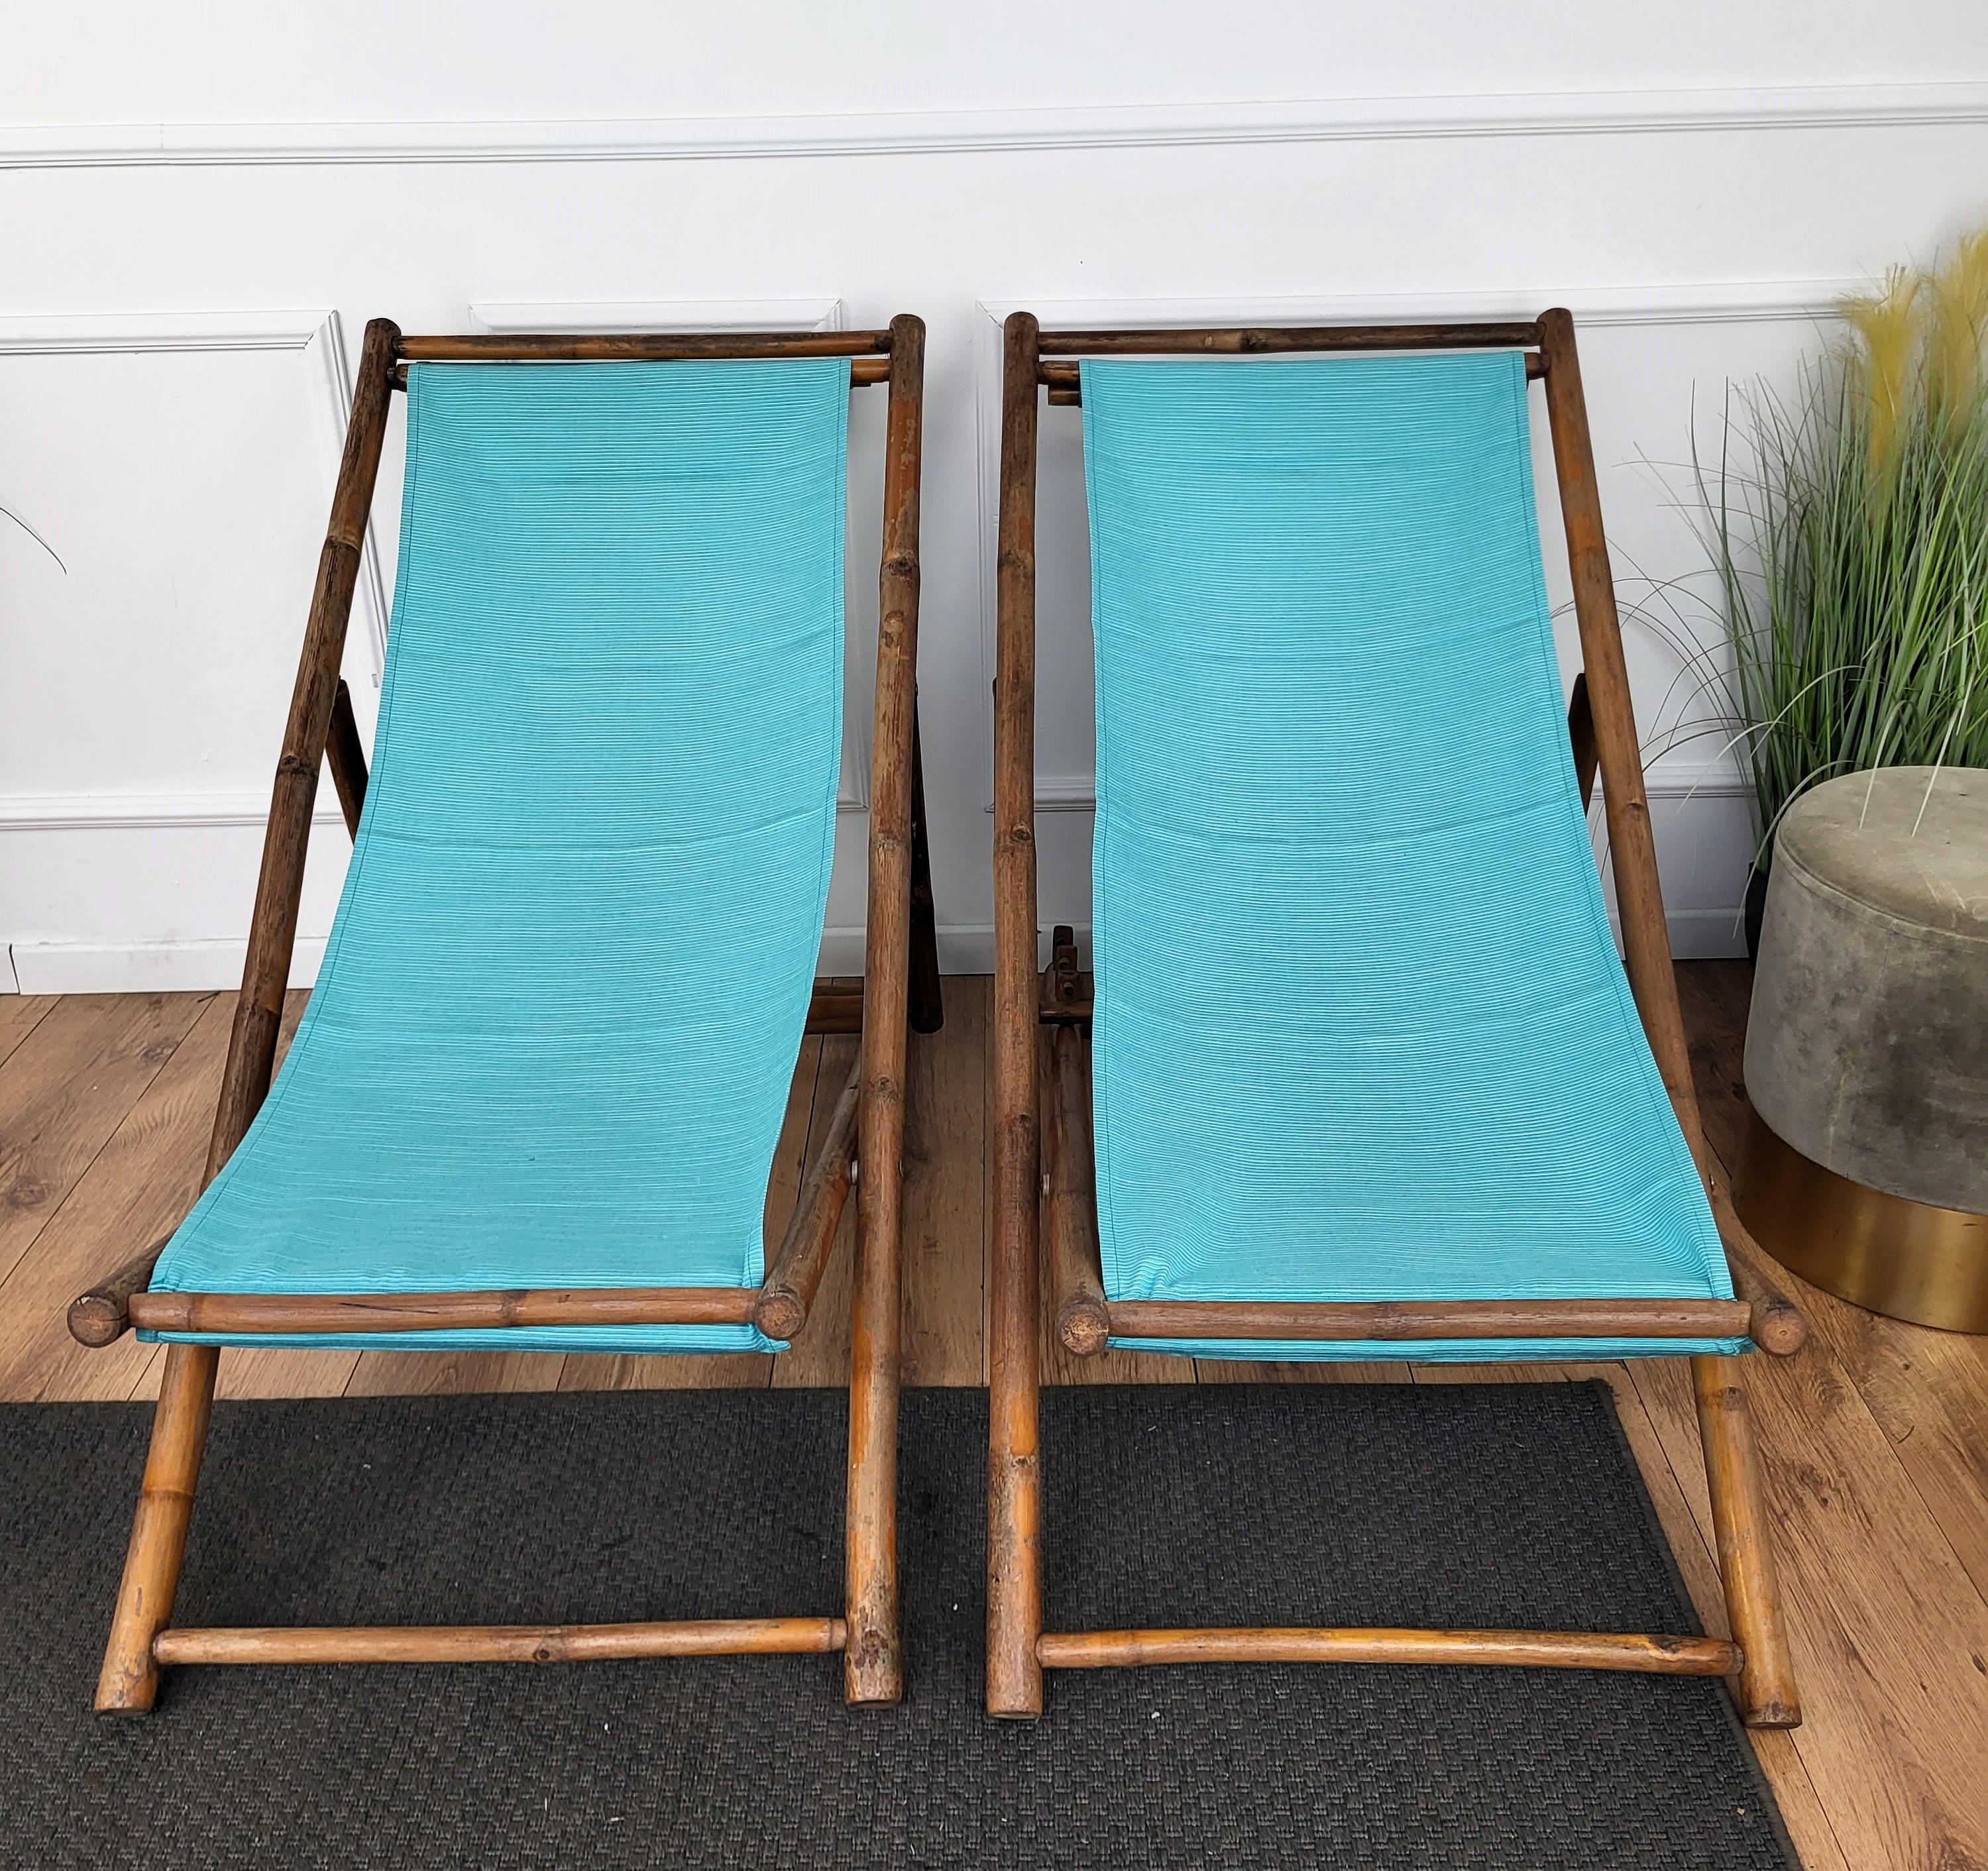 Mid-Century Modern Transat Folding Deck Chair Patio Lounger, Chaise Longue, Bambo Wood and Fabric For Sale